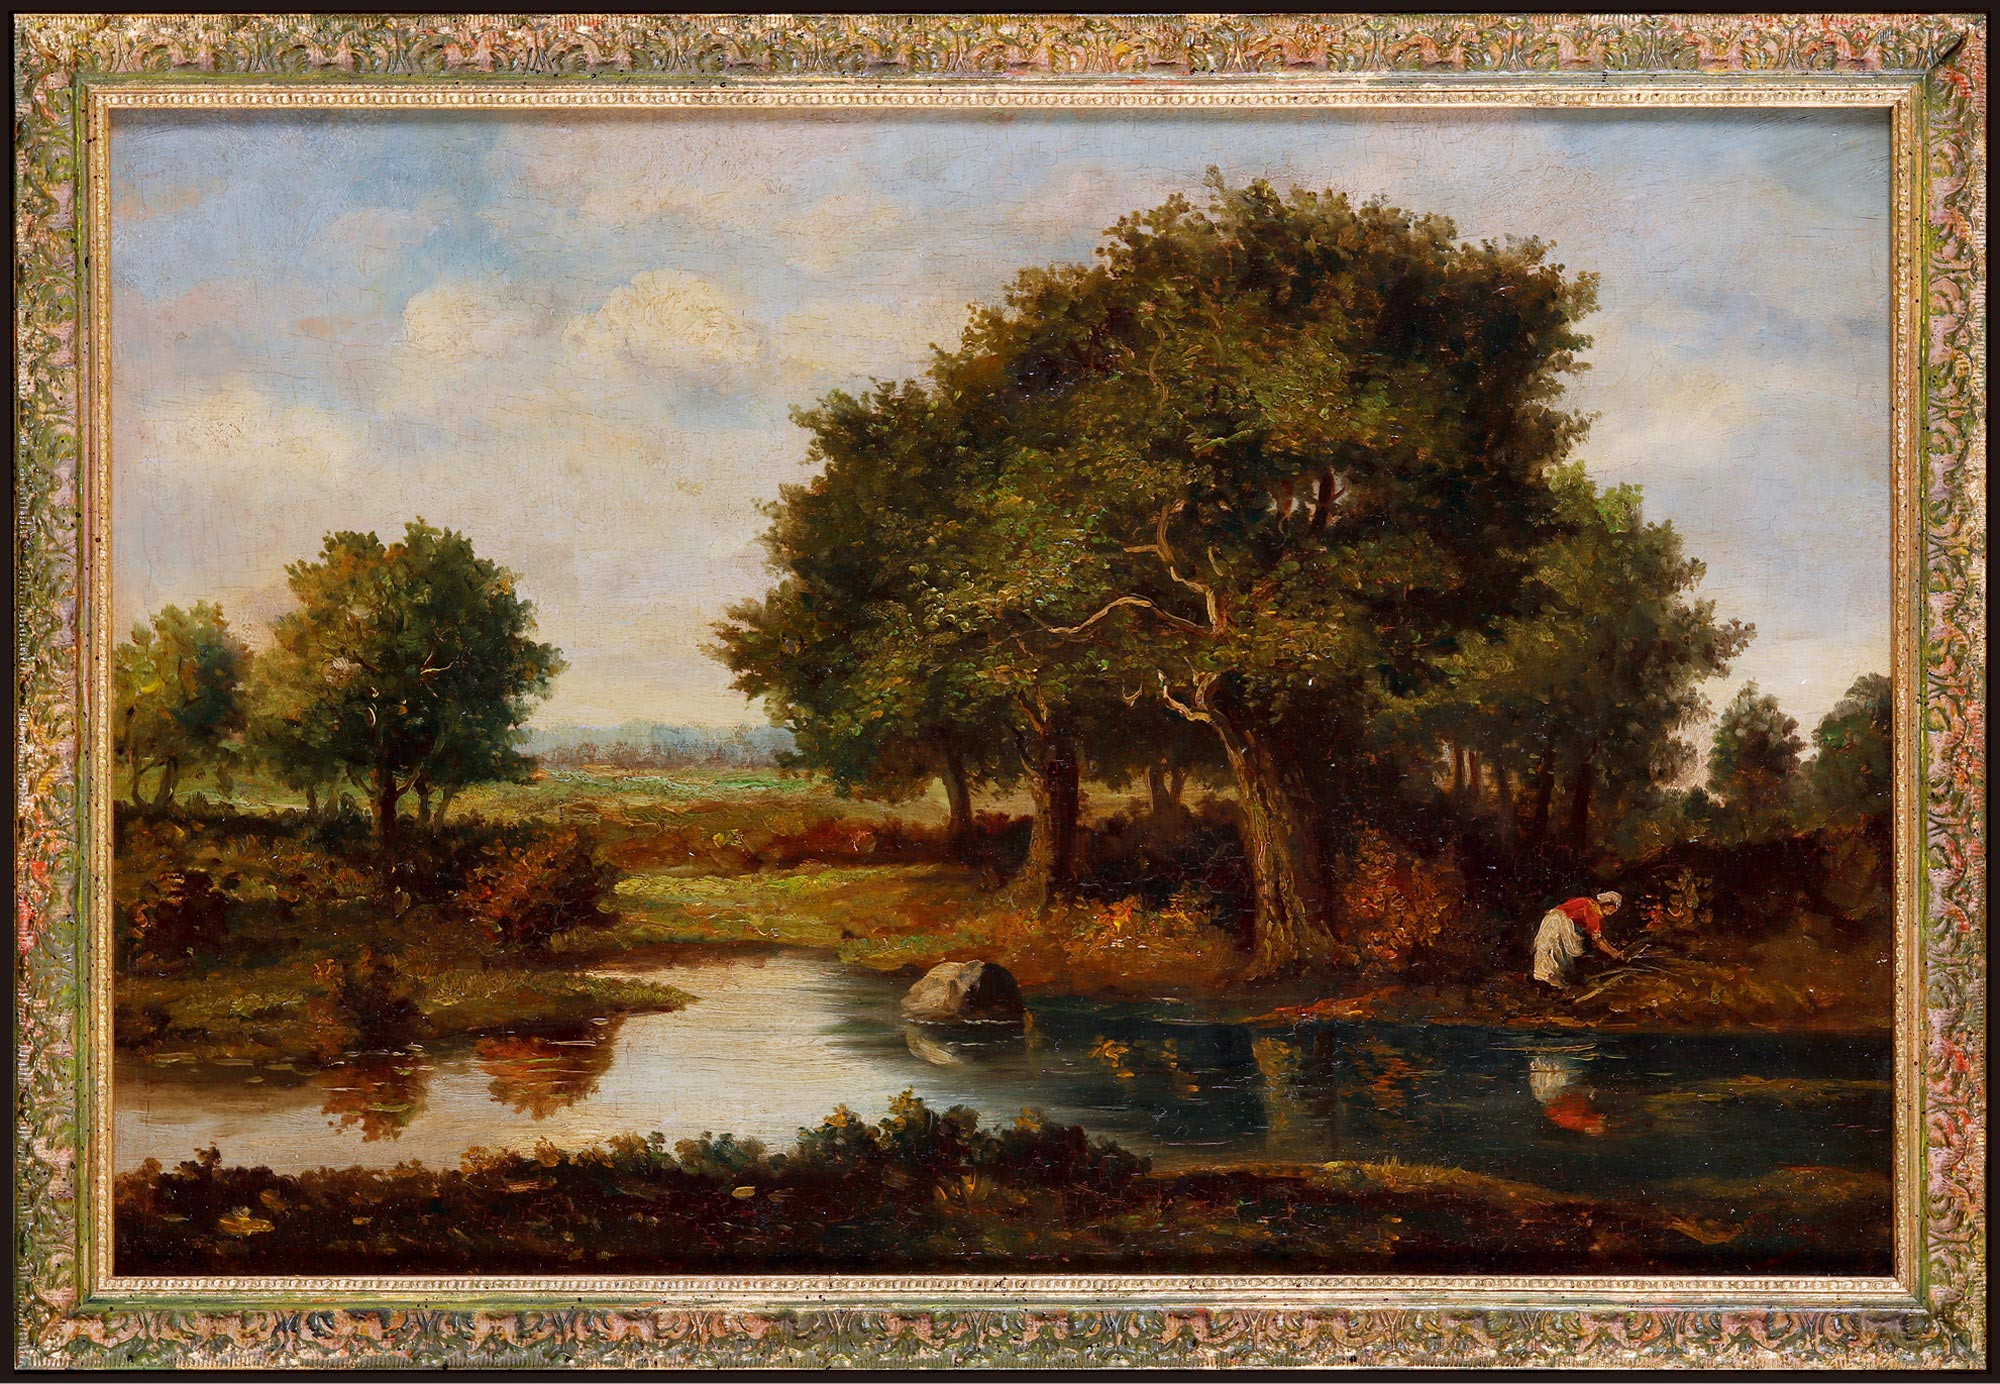 The oil painting “Gathering Firewood by the Lake” by Narcisse Díaz de la Pena, a famous French Barbizon painter, with certificate